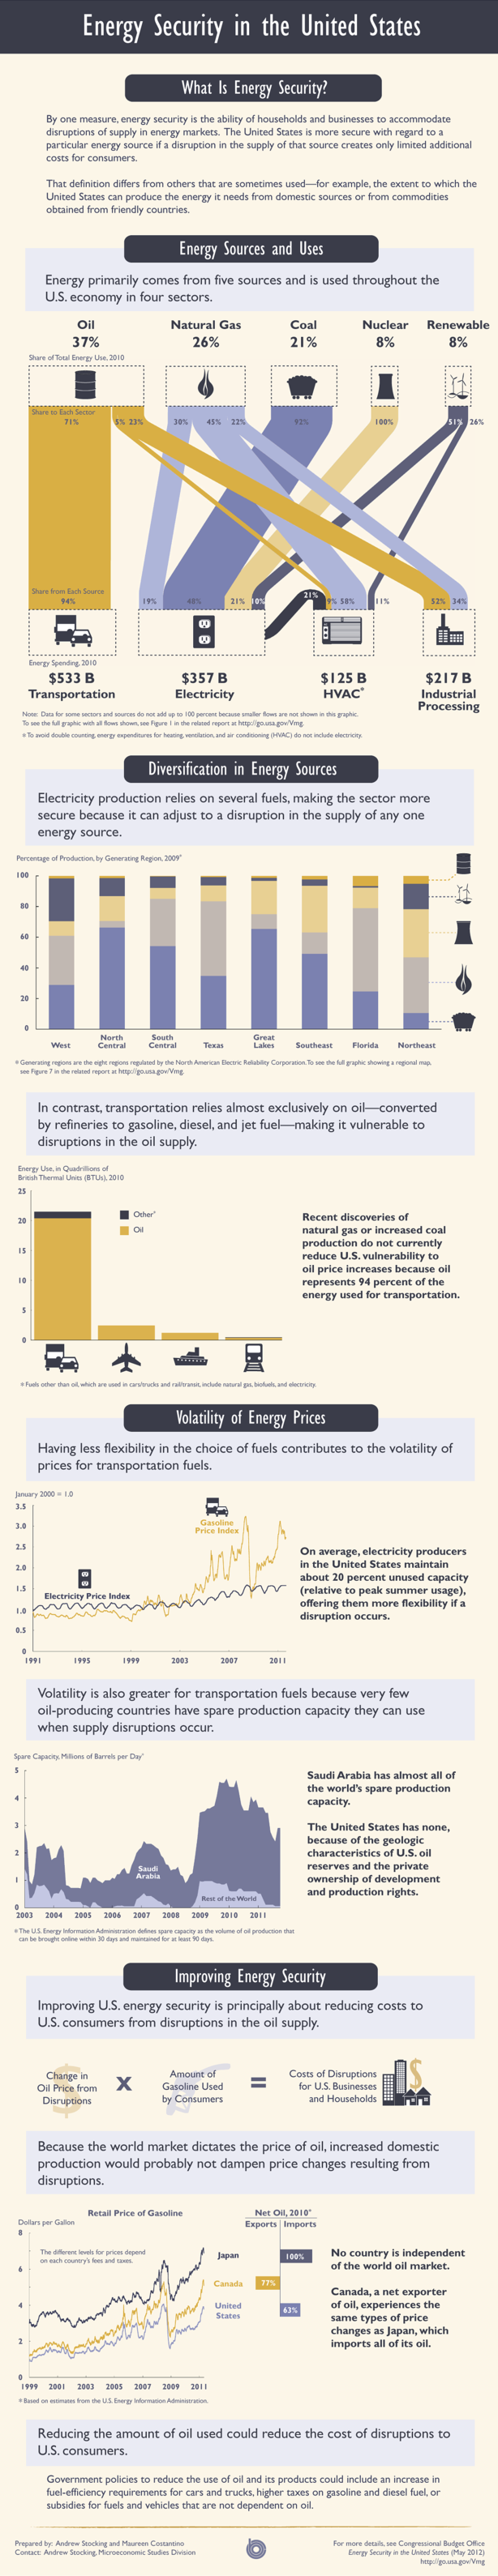 43232-infographic-EnergySecurity.png